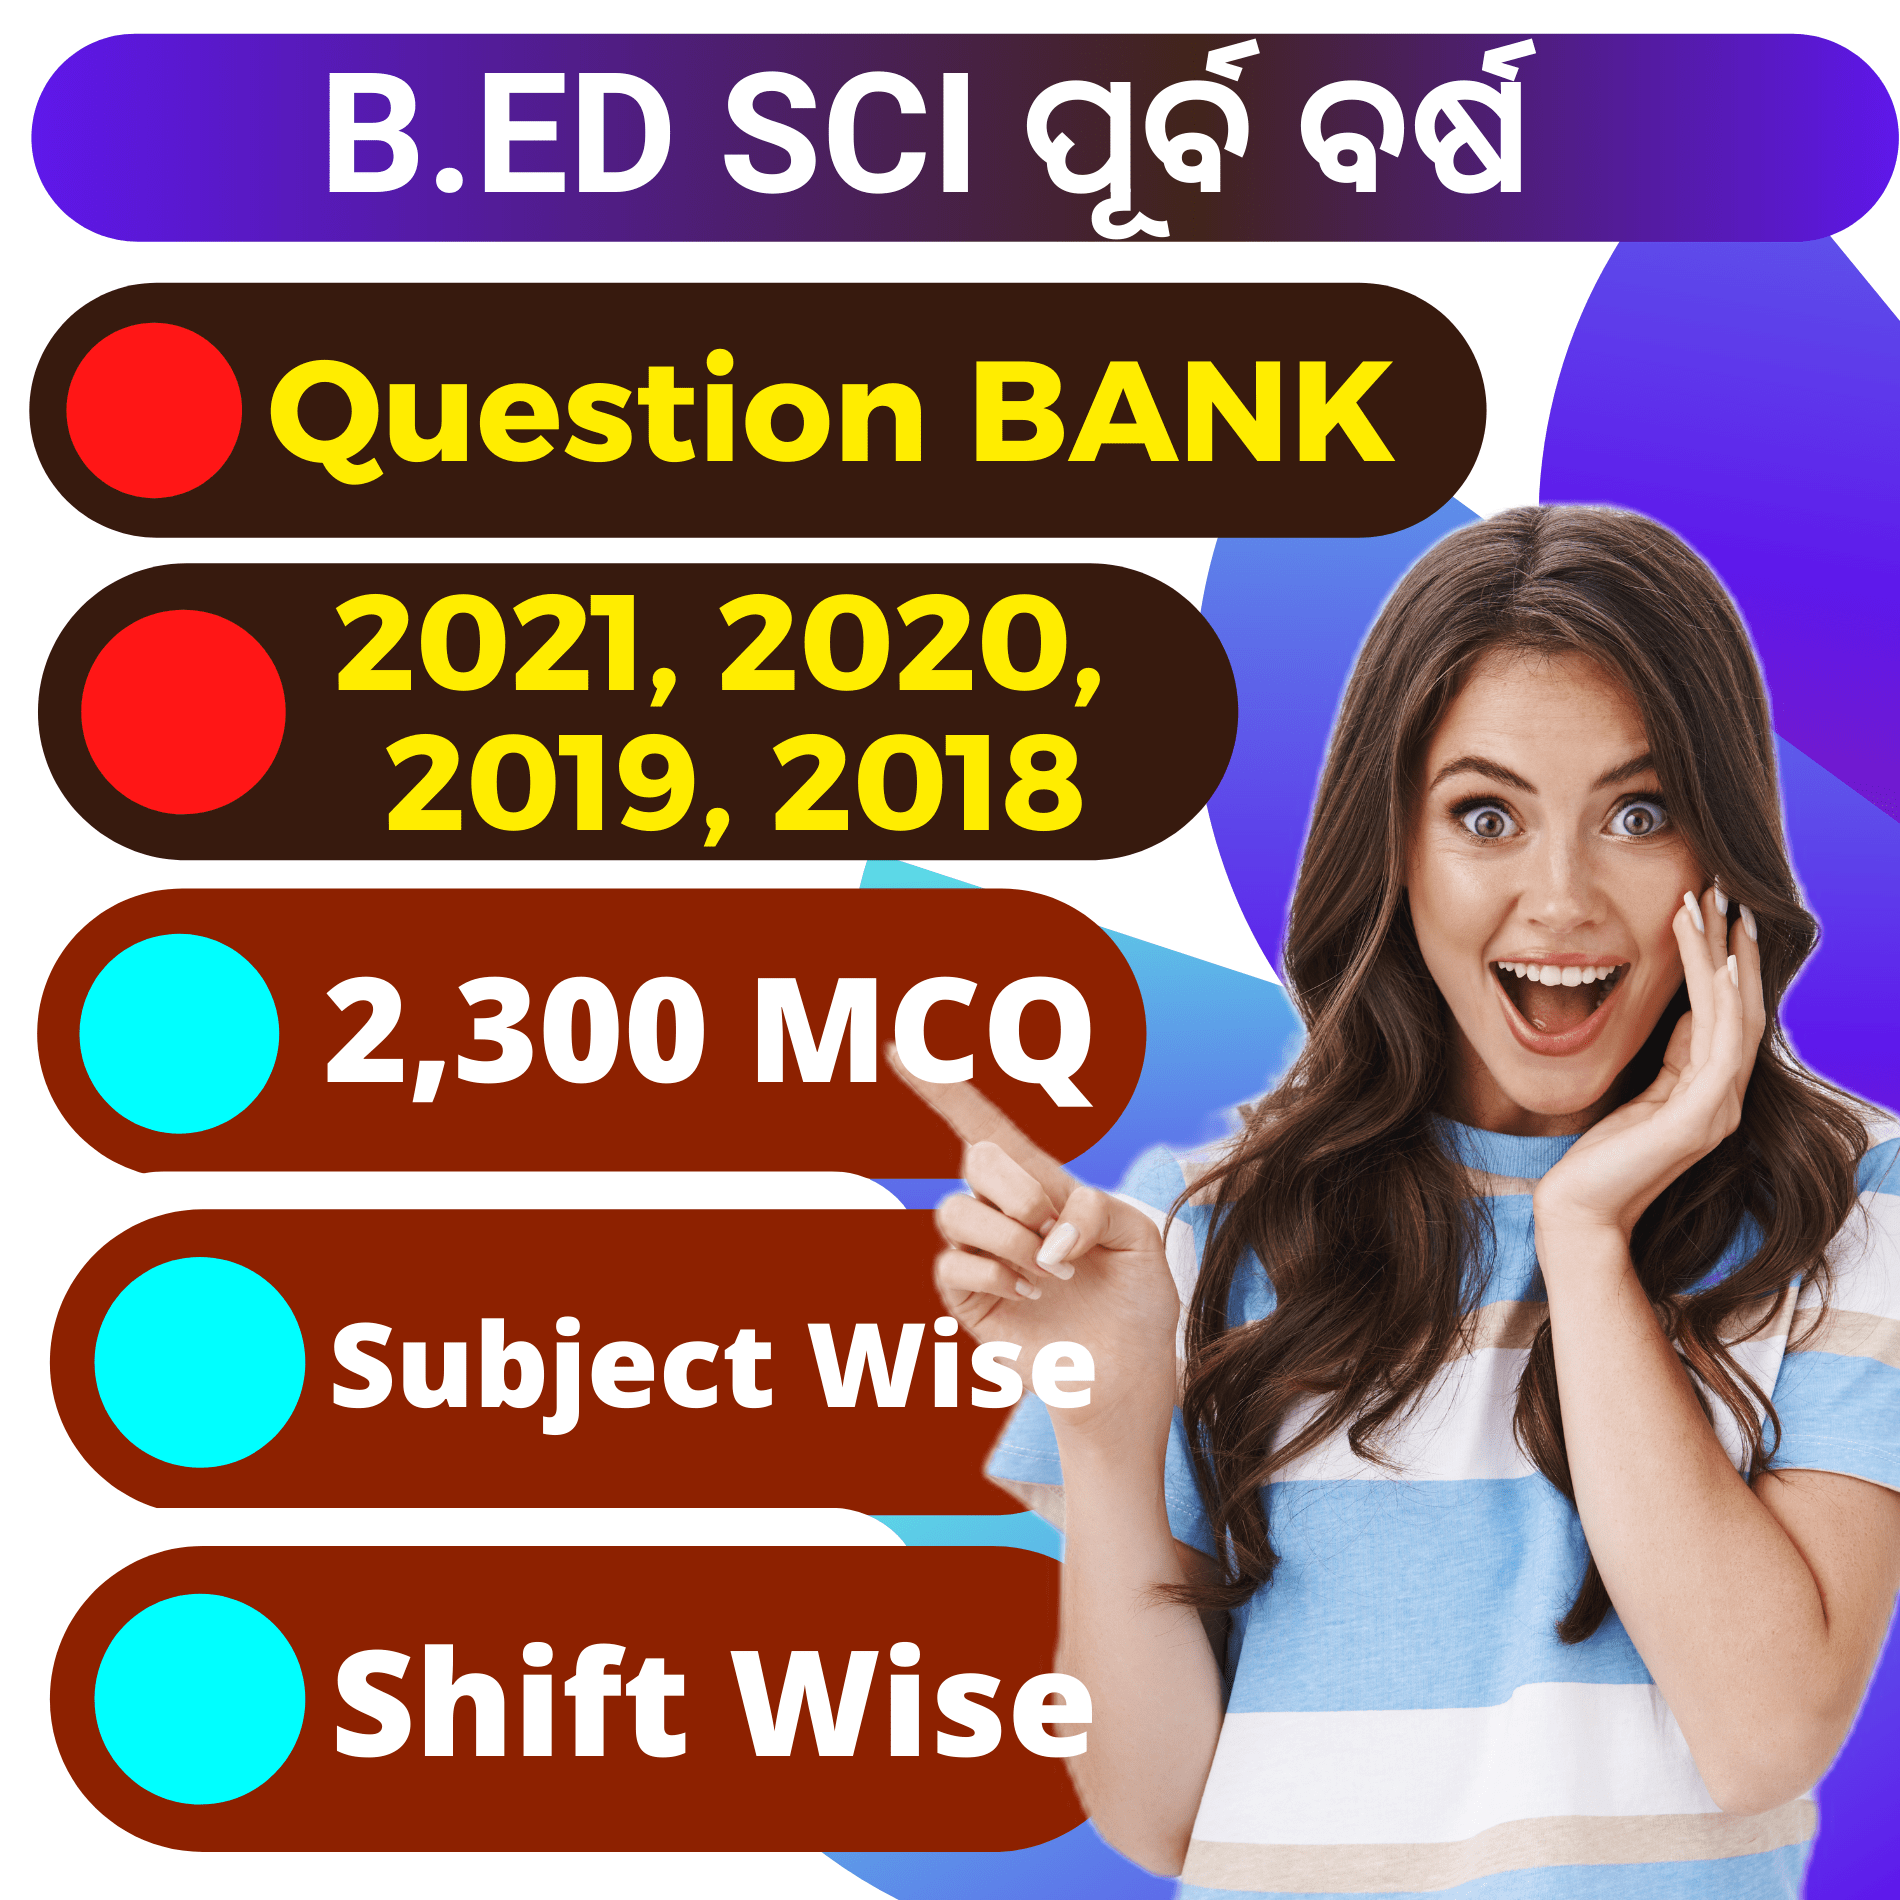 Odisha Bed Science Note